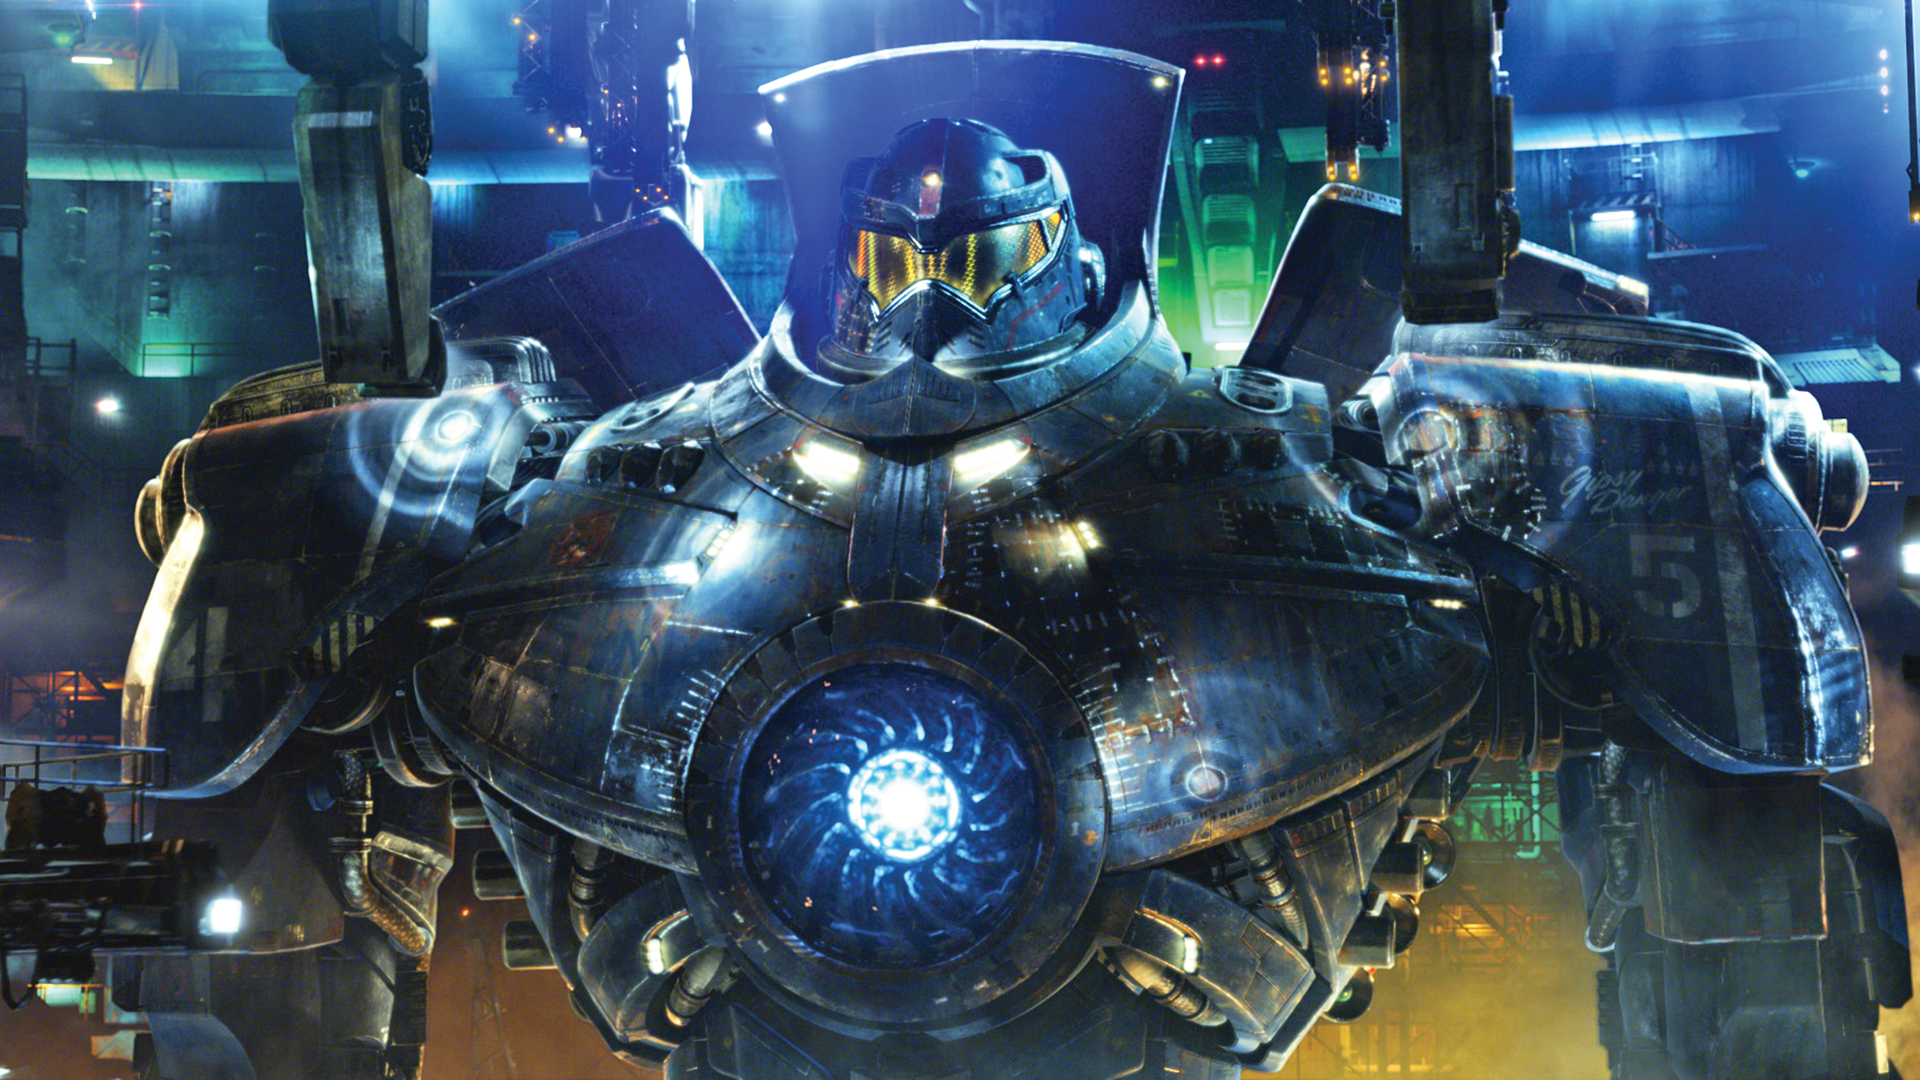 PACIFIC RIM: Best Action Film of the Summer! SEE IT IN IMAX! SEE IT IN 3D!!